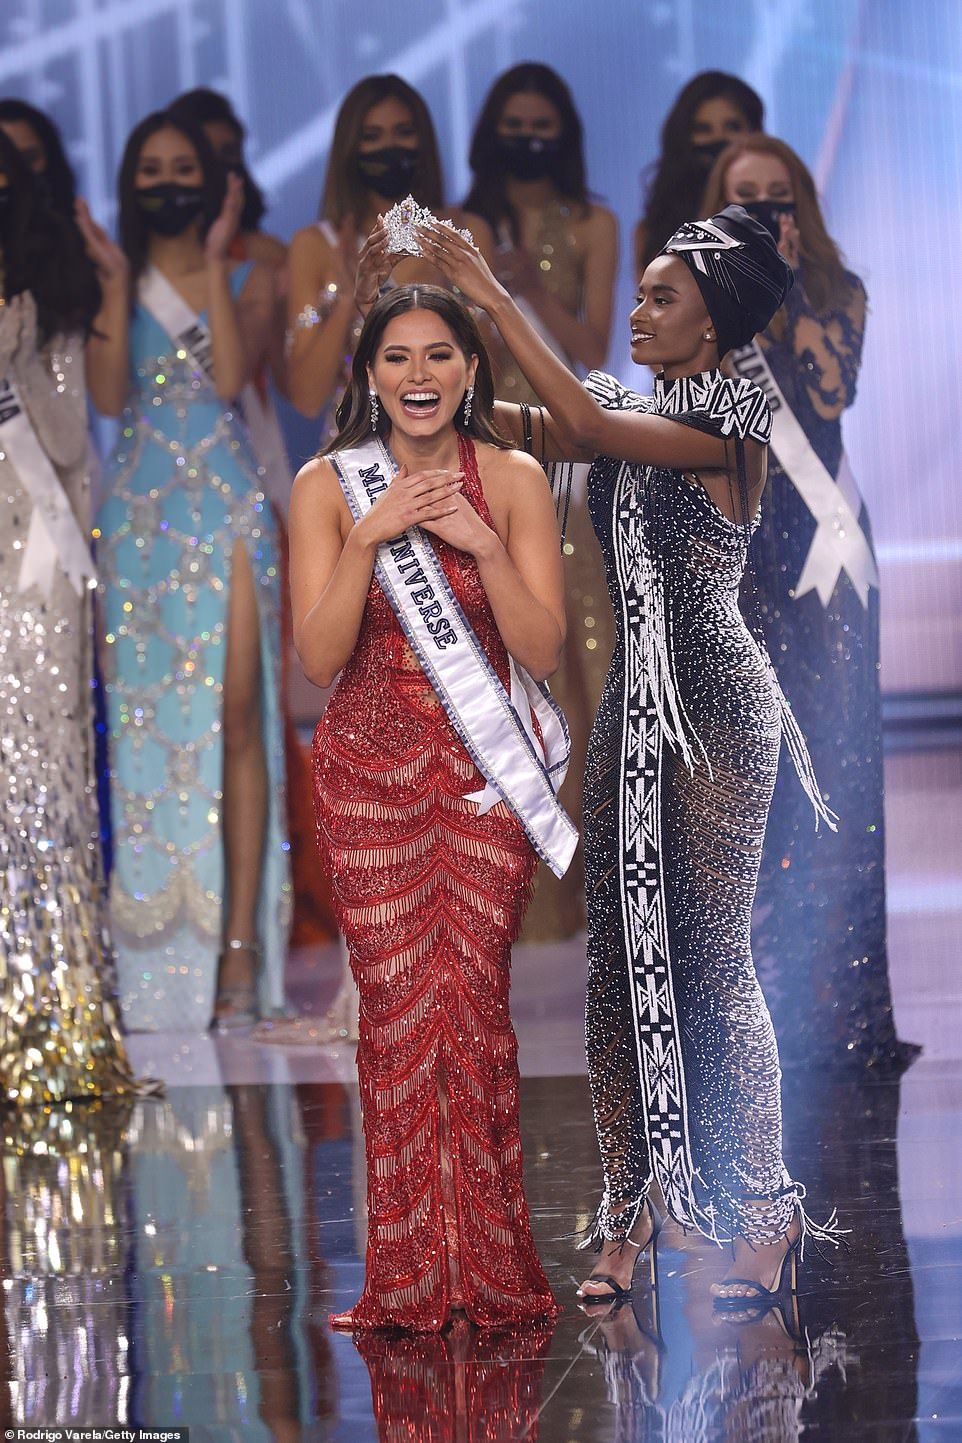 Miss Mexico Andrea Meza was crowned Miss Universe 2021 after the 2020 pageant was canceled due to COVID